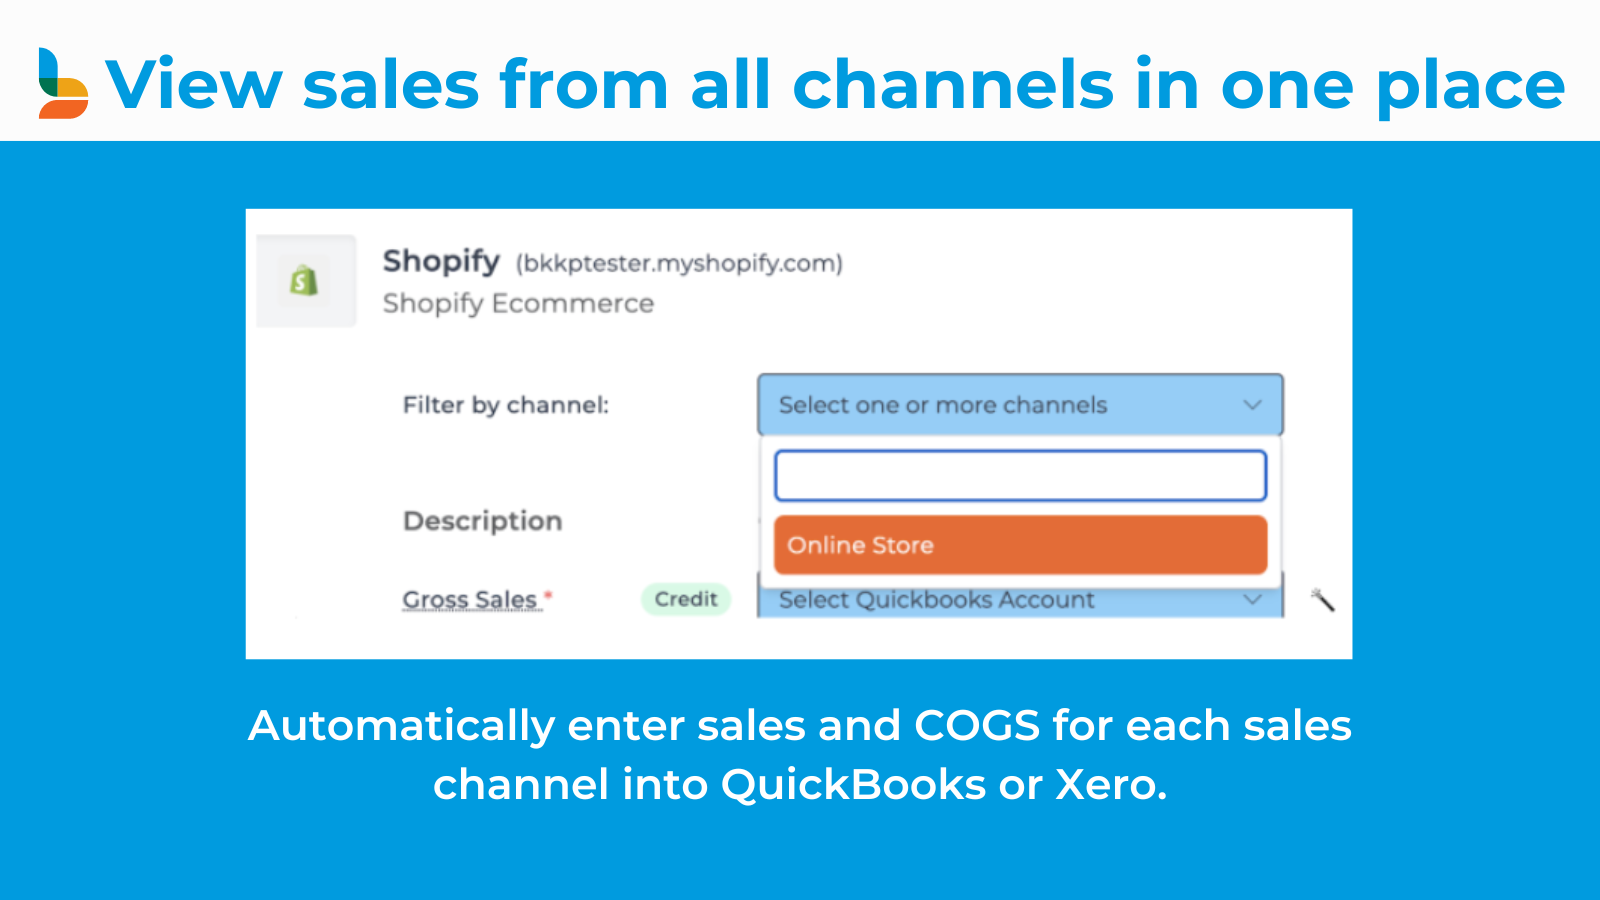 Get all multichannel sales by channel into QuickBooks or Xero